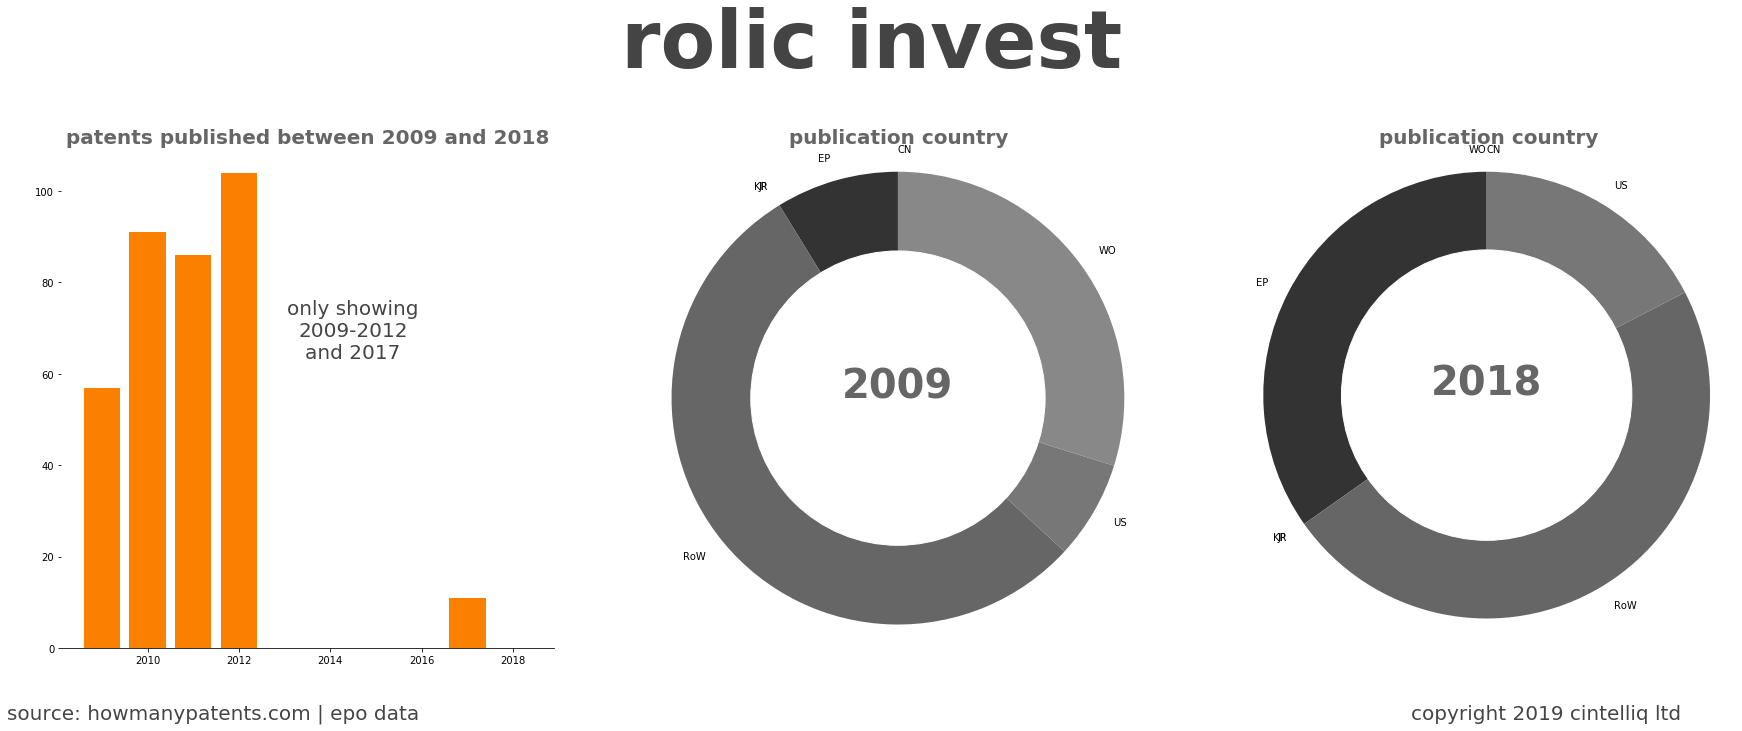 summary of patents for Rolic Invest